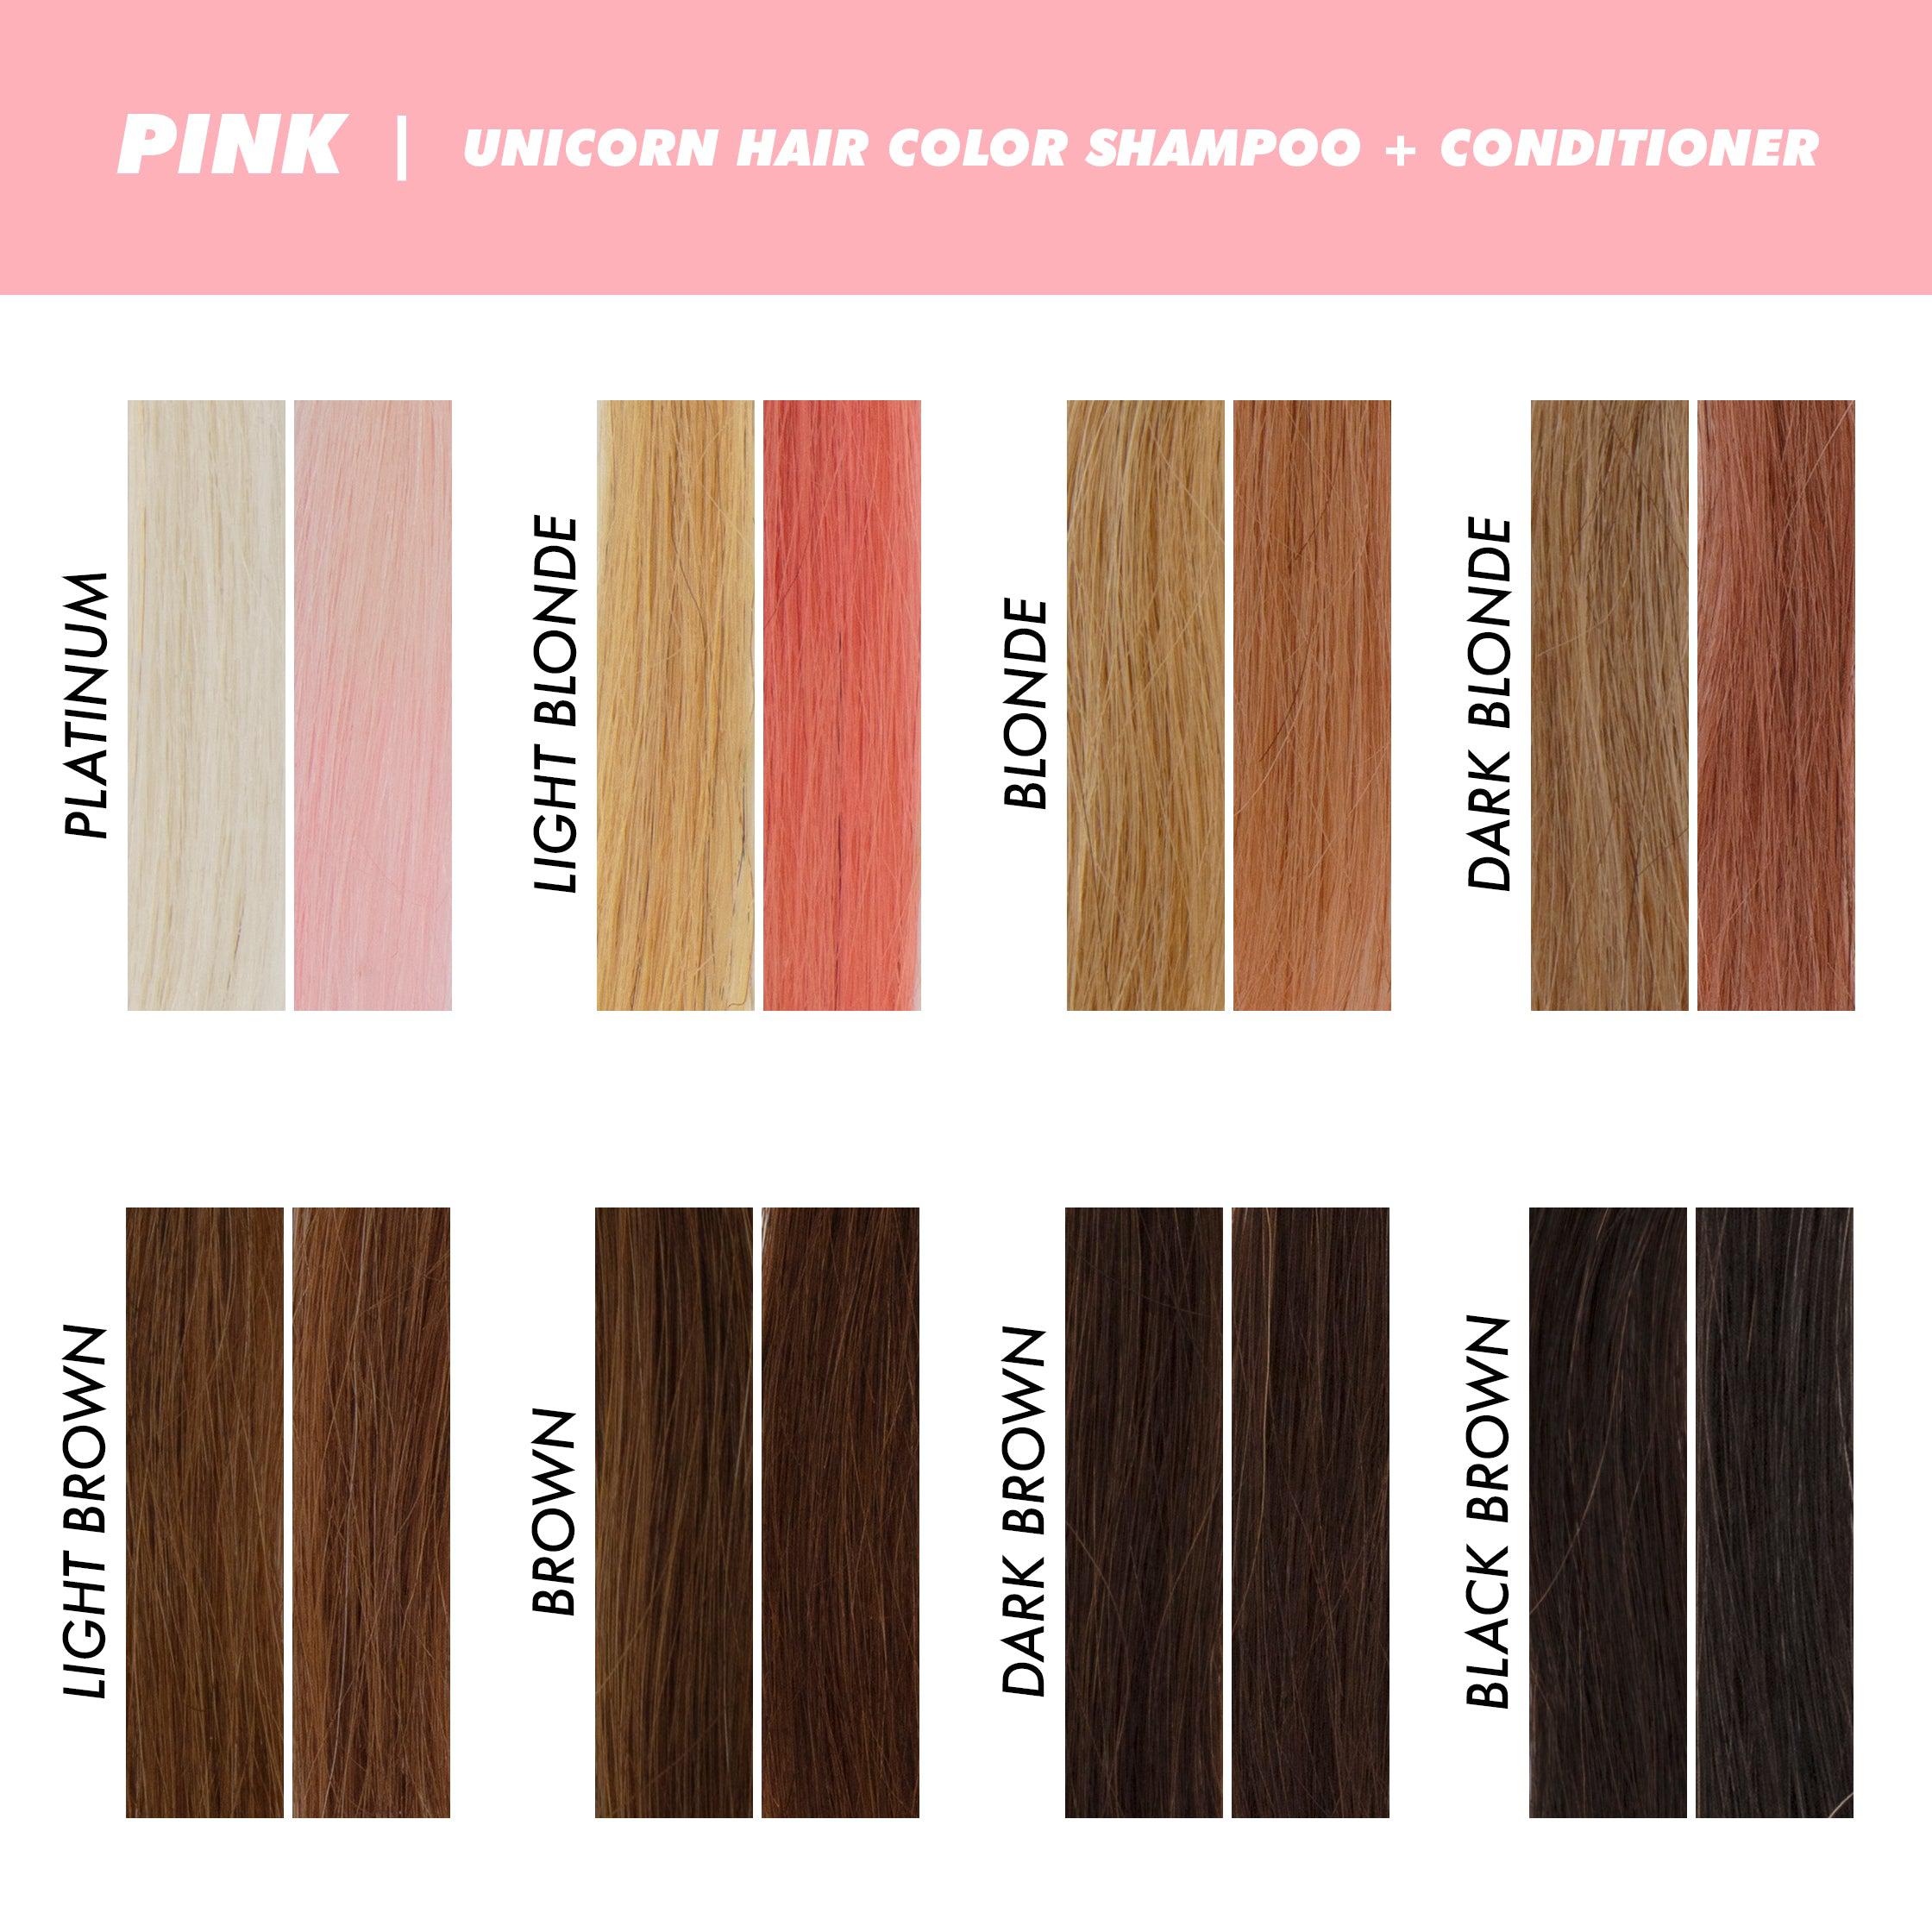 Unicorn Hair Color Conditioner  variant:Pink